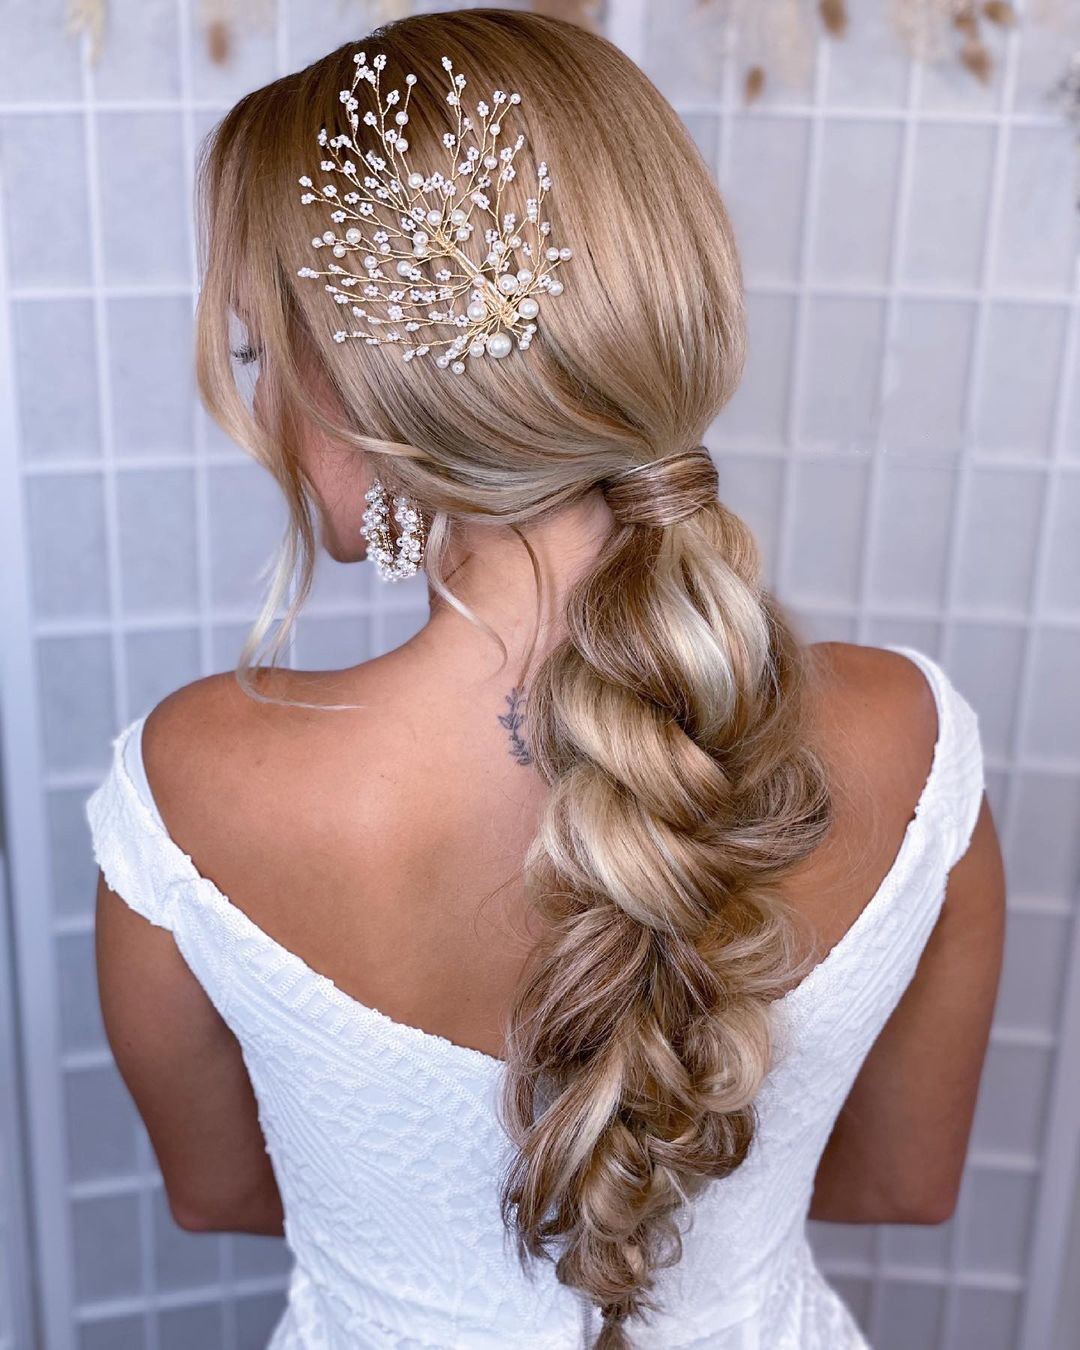 20+ Best Bridesmaid Hairstyles Ideas 2023 [Guide & Tips]